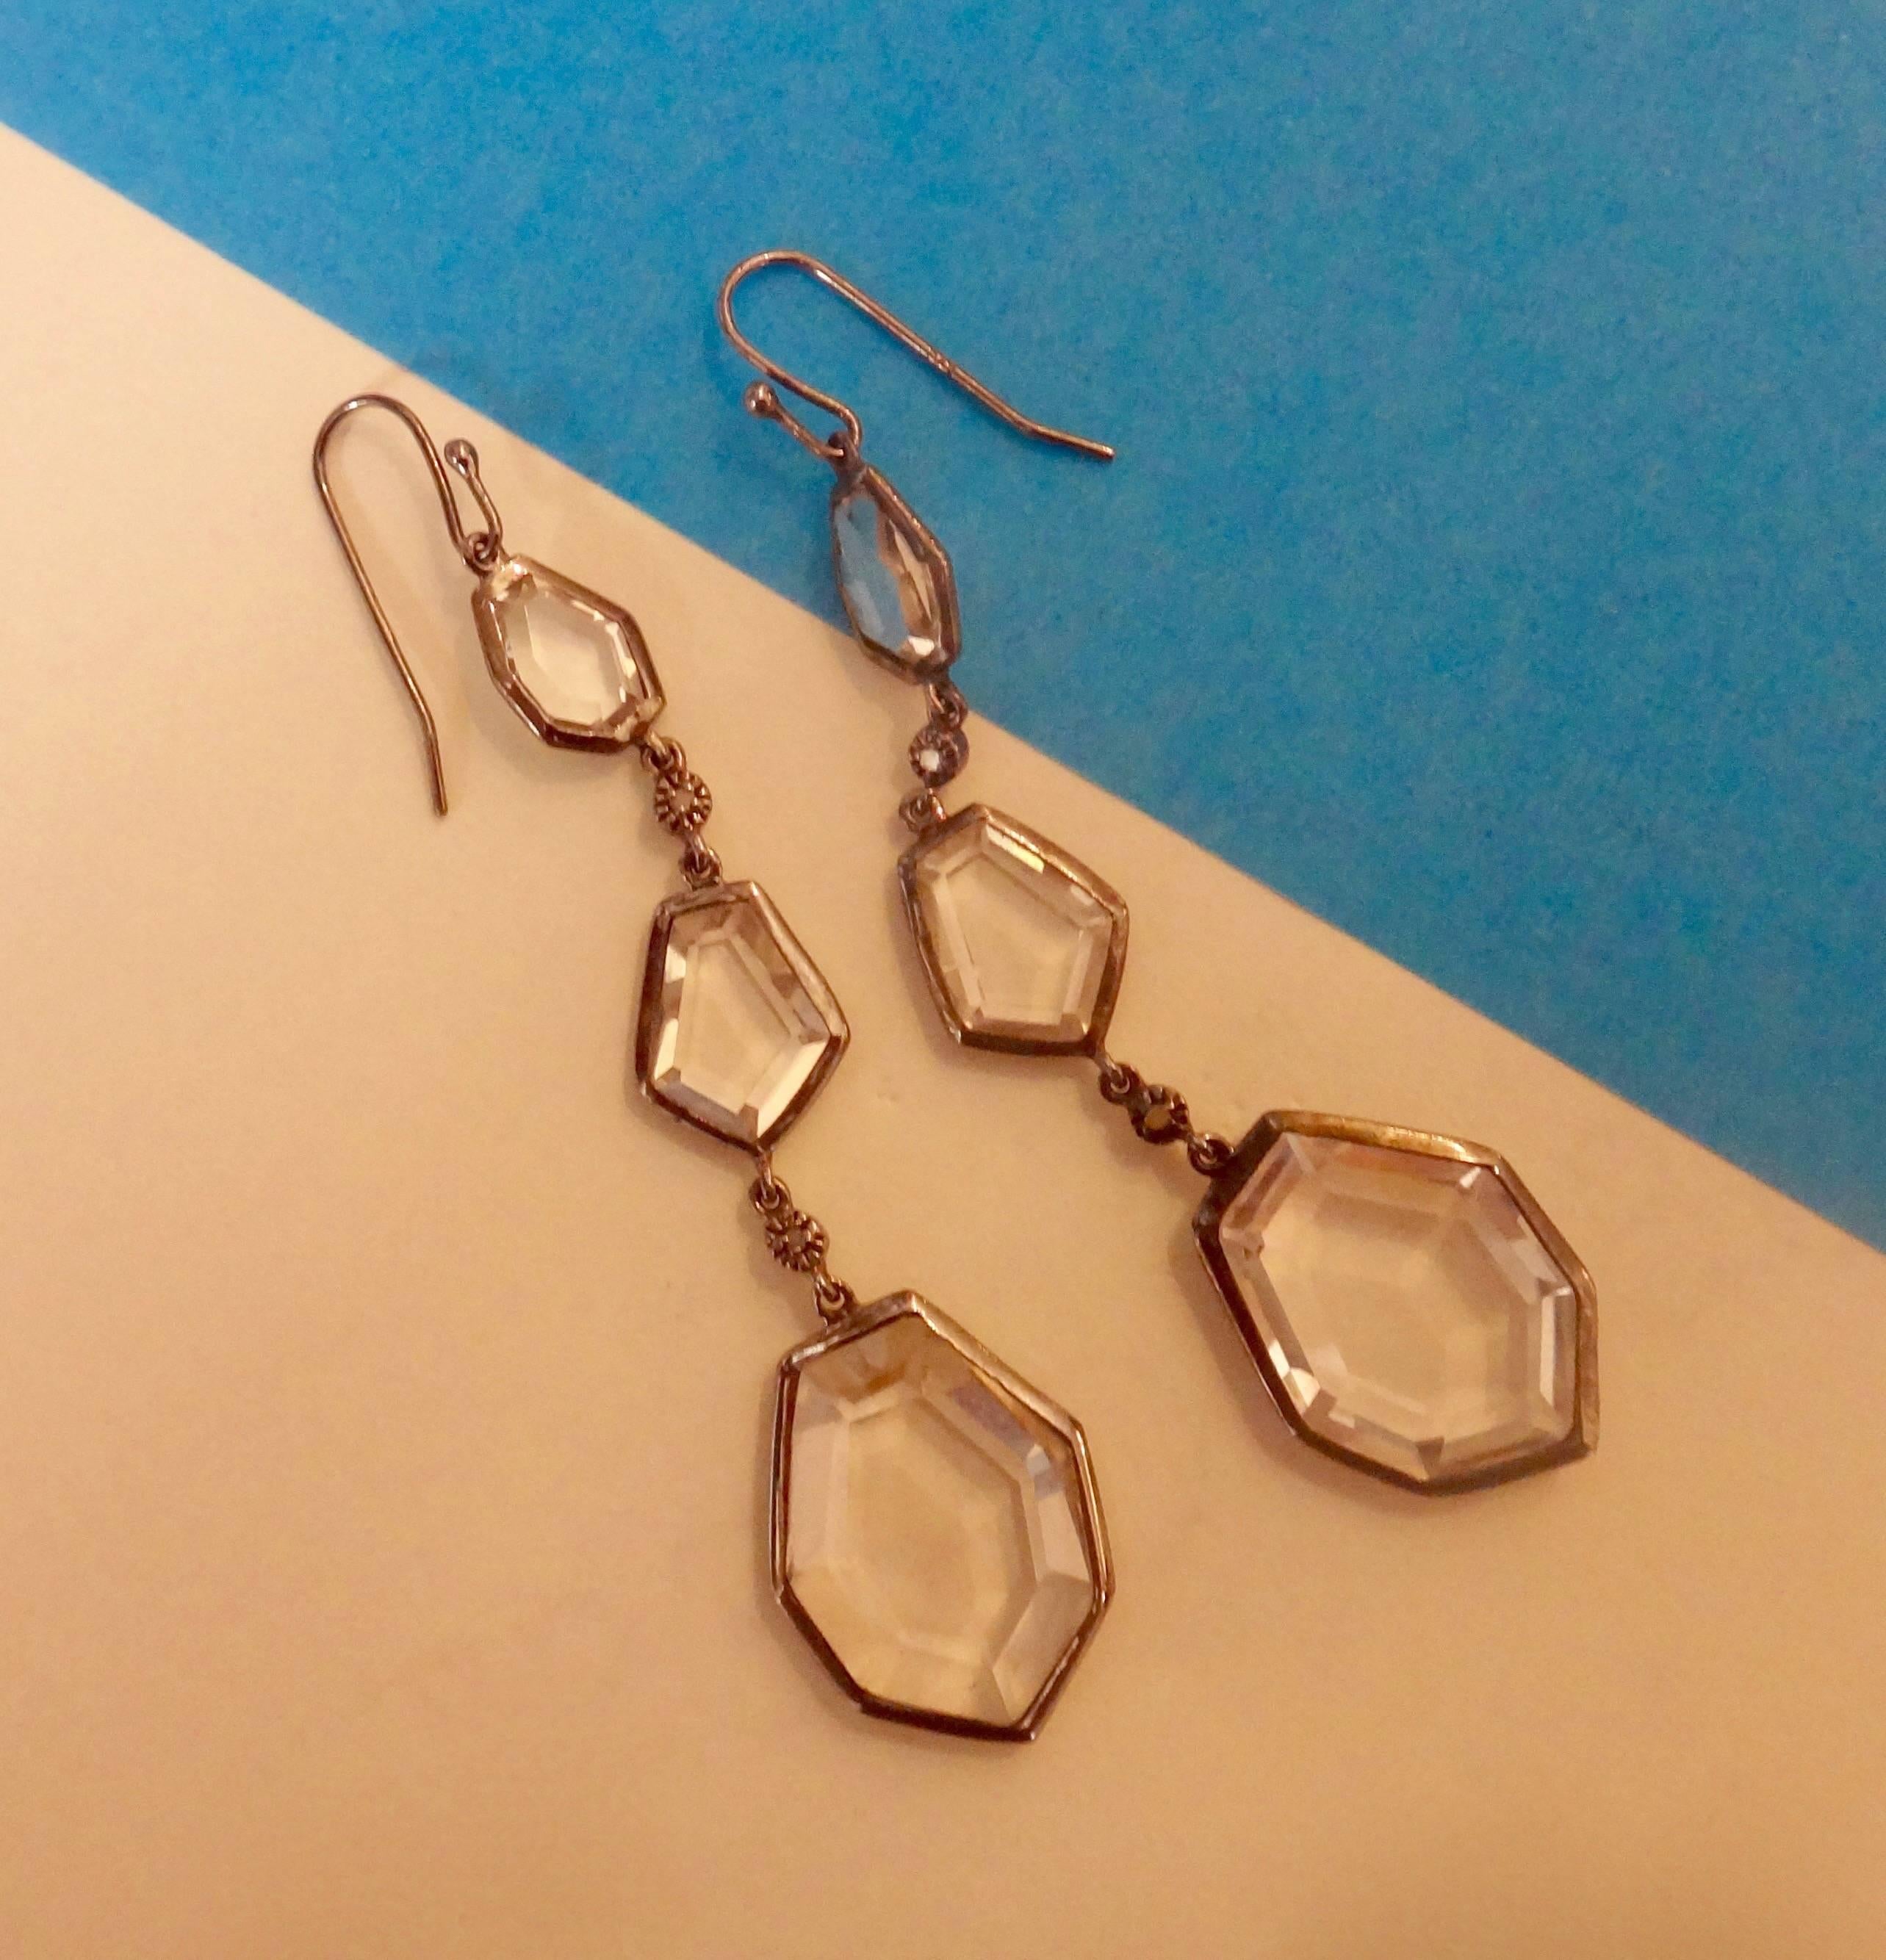 Geometric shapes of sliced and faceted rock crystal are bezel set in blackened sterling silver.  These lightweight, dramatic dangle earrings are so easy to wear both daytime and evening.  